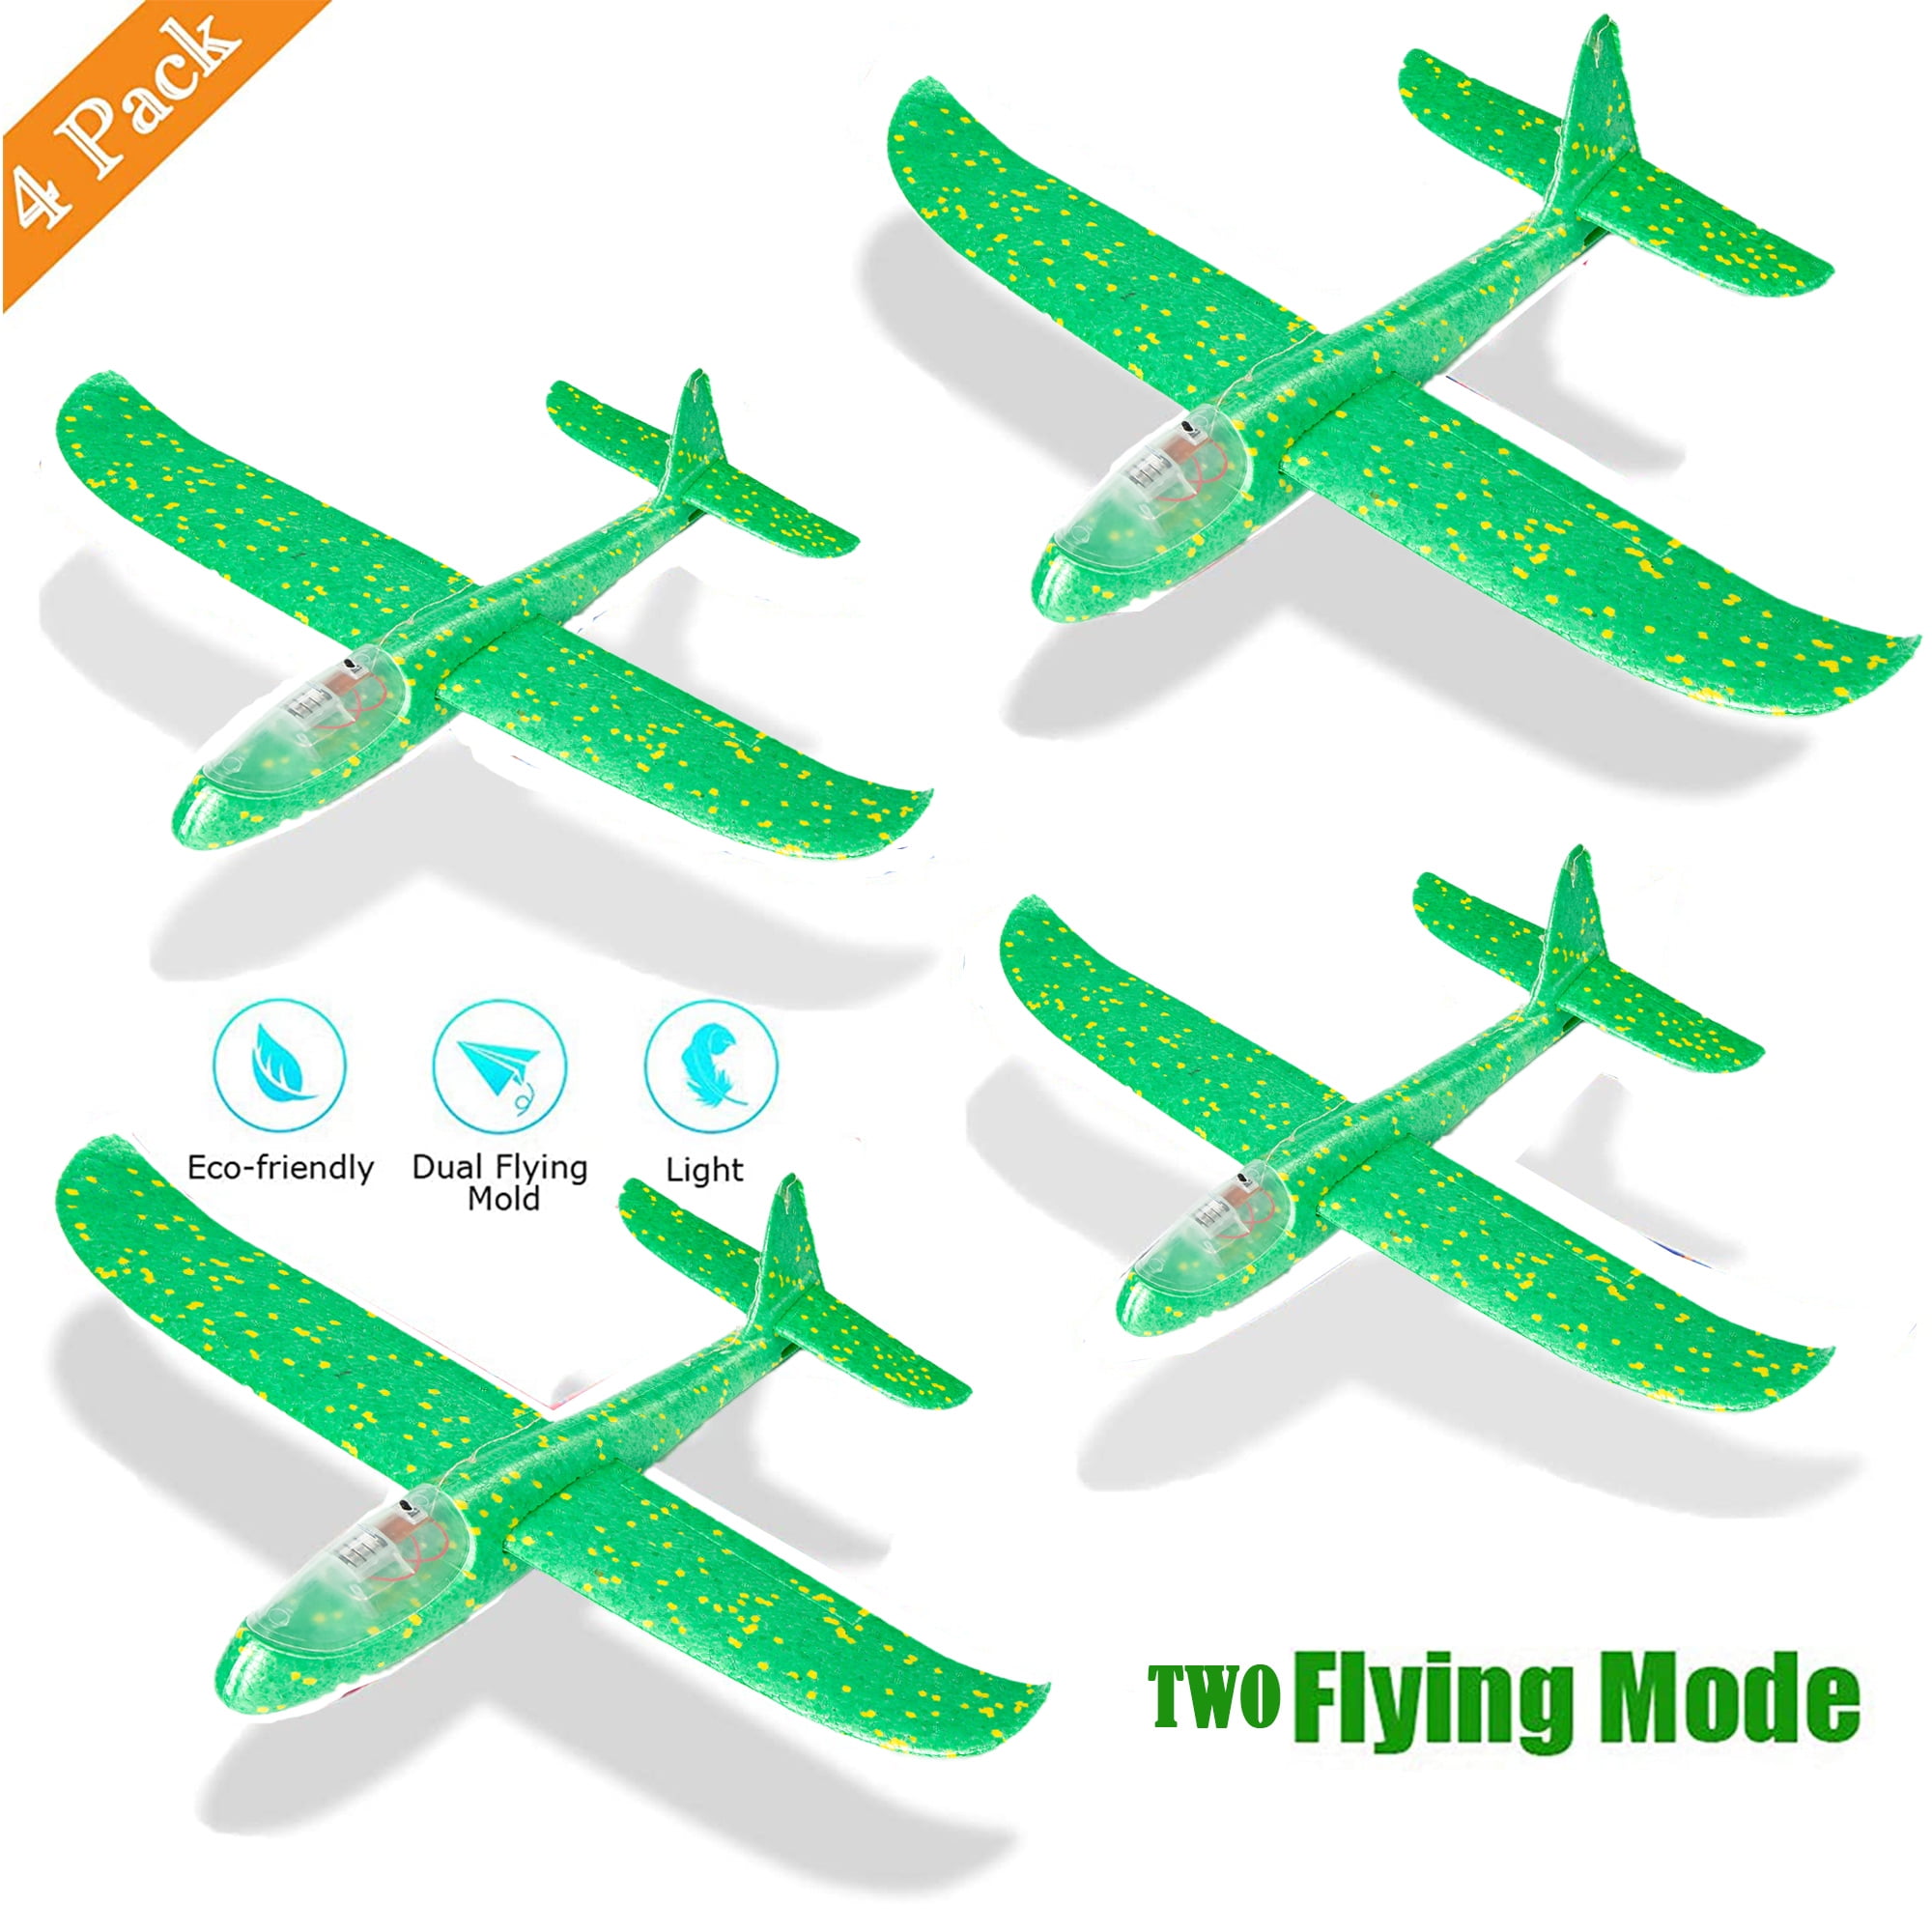 TukTek Toy Jets for Kids 4 Pack Flying Fighter Planes for 2 Players Rubber Band Propelled Airplane Gliders for Boys & Girls 